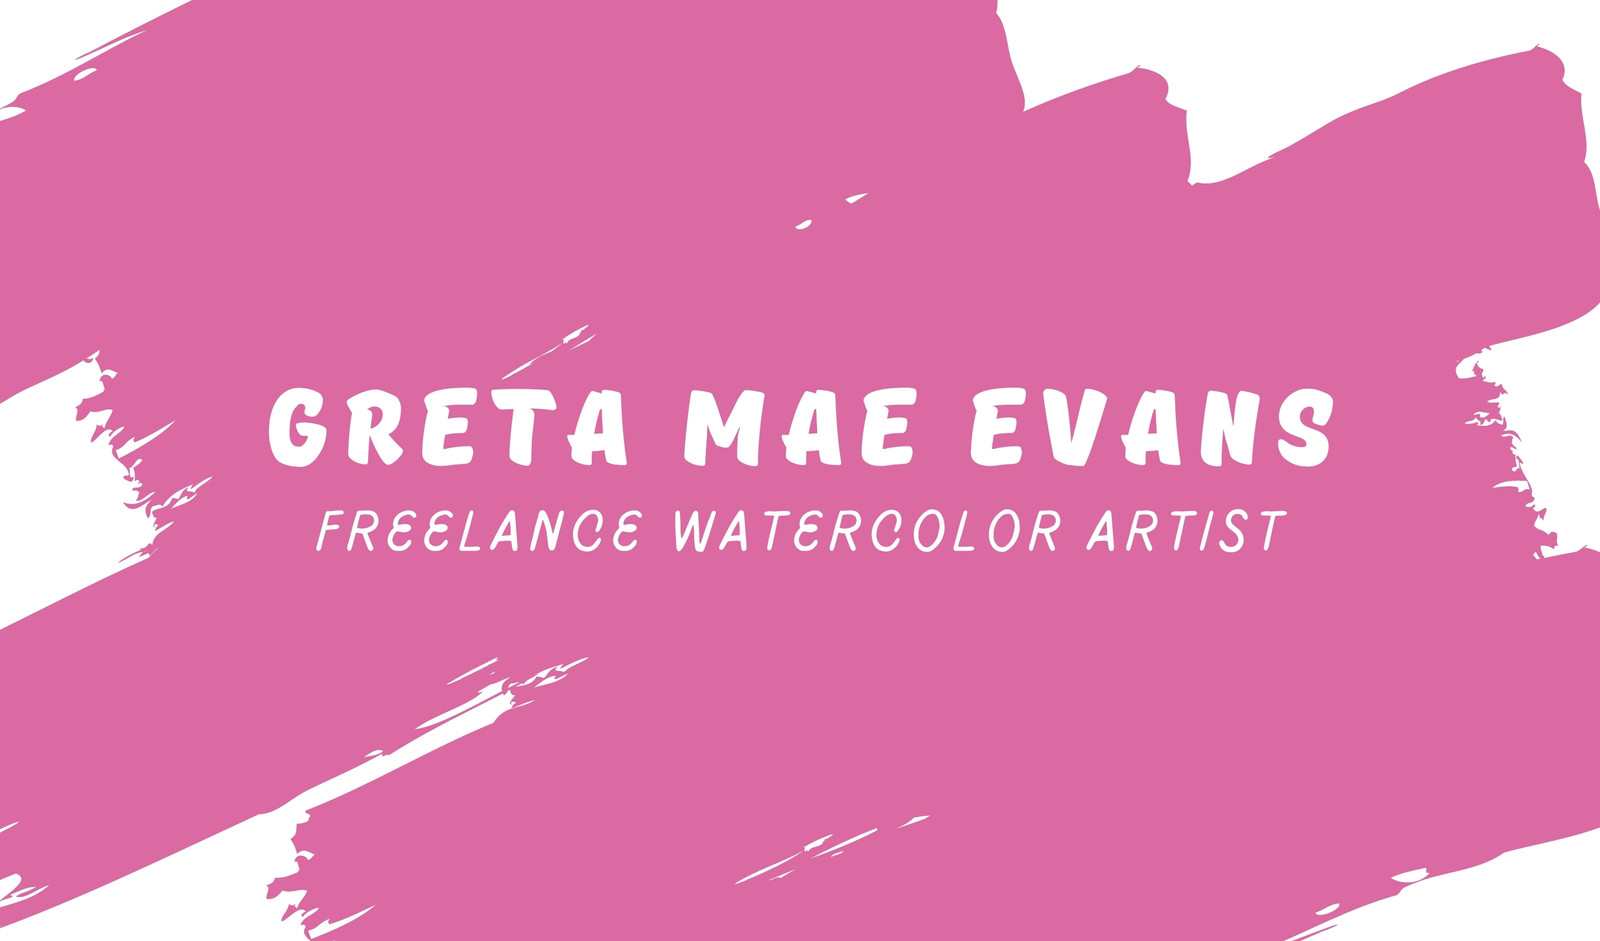 https://marketplace.canva.com/EADaoR54dME/5/0/1600w/canva-writer-business-card-in-white-pink-creative-playful-watercolor-painting-brush-strokes-L6oa2IDtC-A.jpg